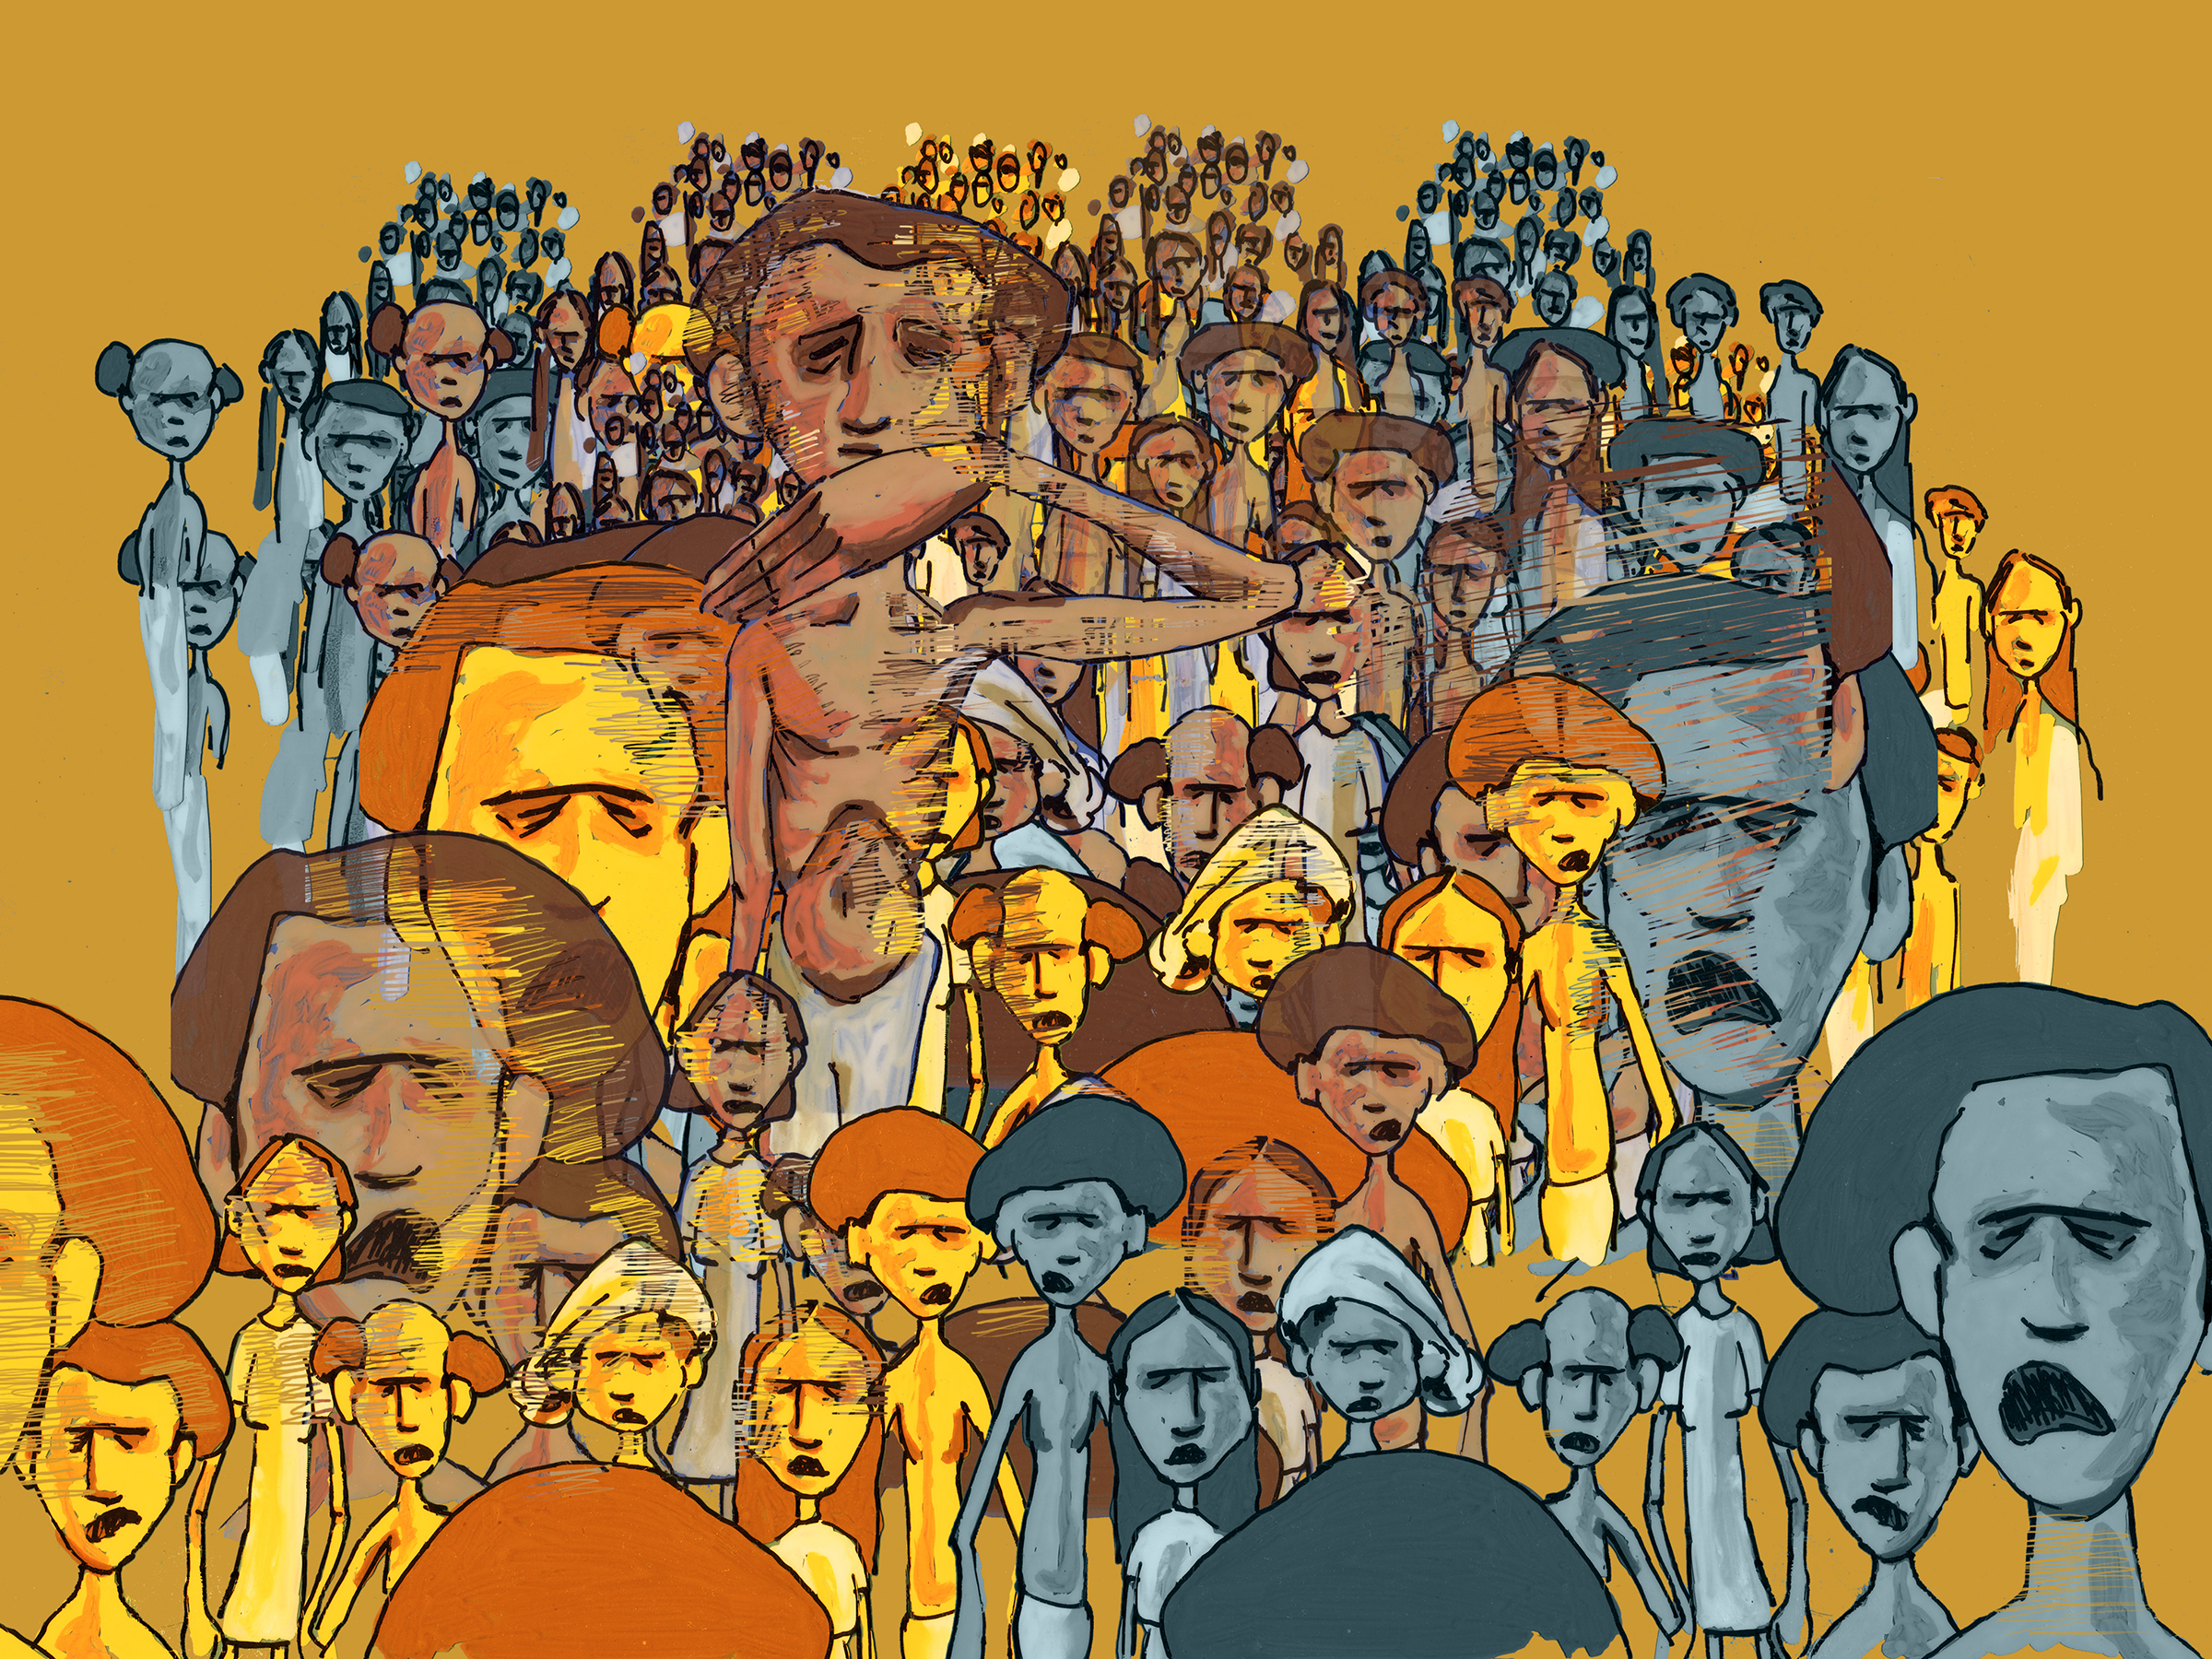 A stylized drawing of large crowd of people. Each human figure is rendered in tans, yellow and orange or shades of grey. Some of the figures in the foreground appear to be very thin and even emaciated-looking.